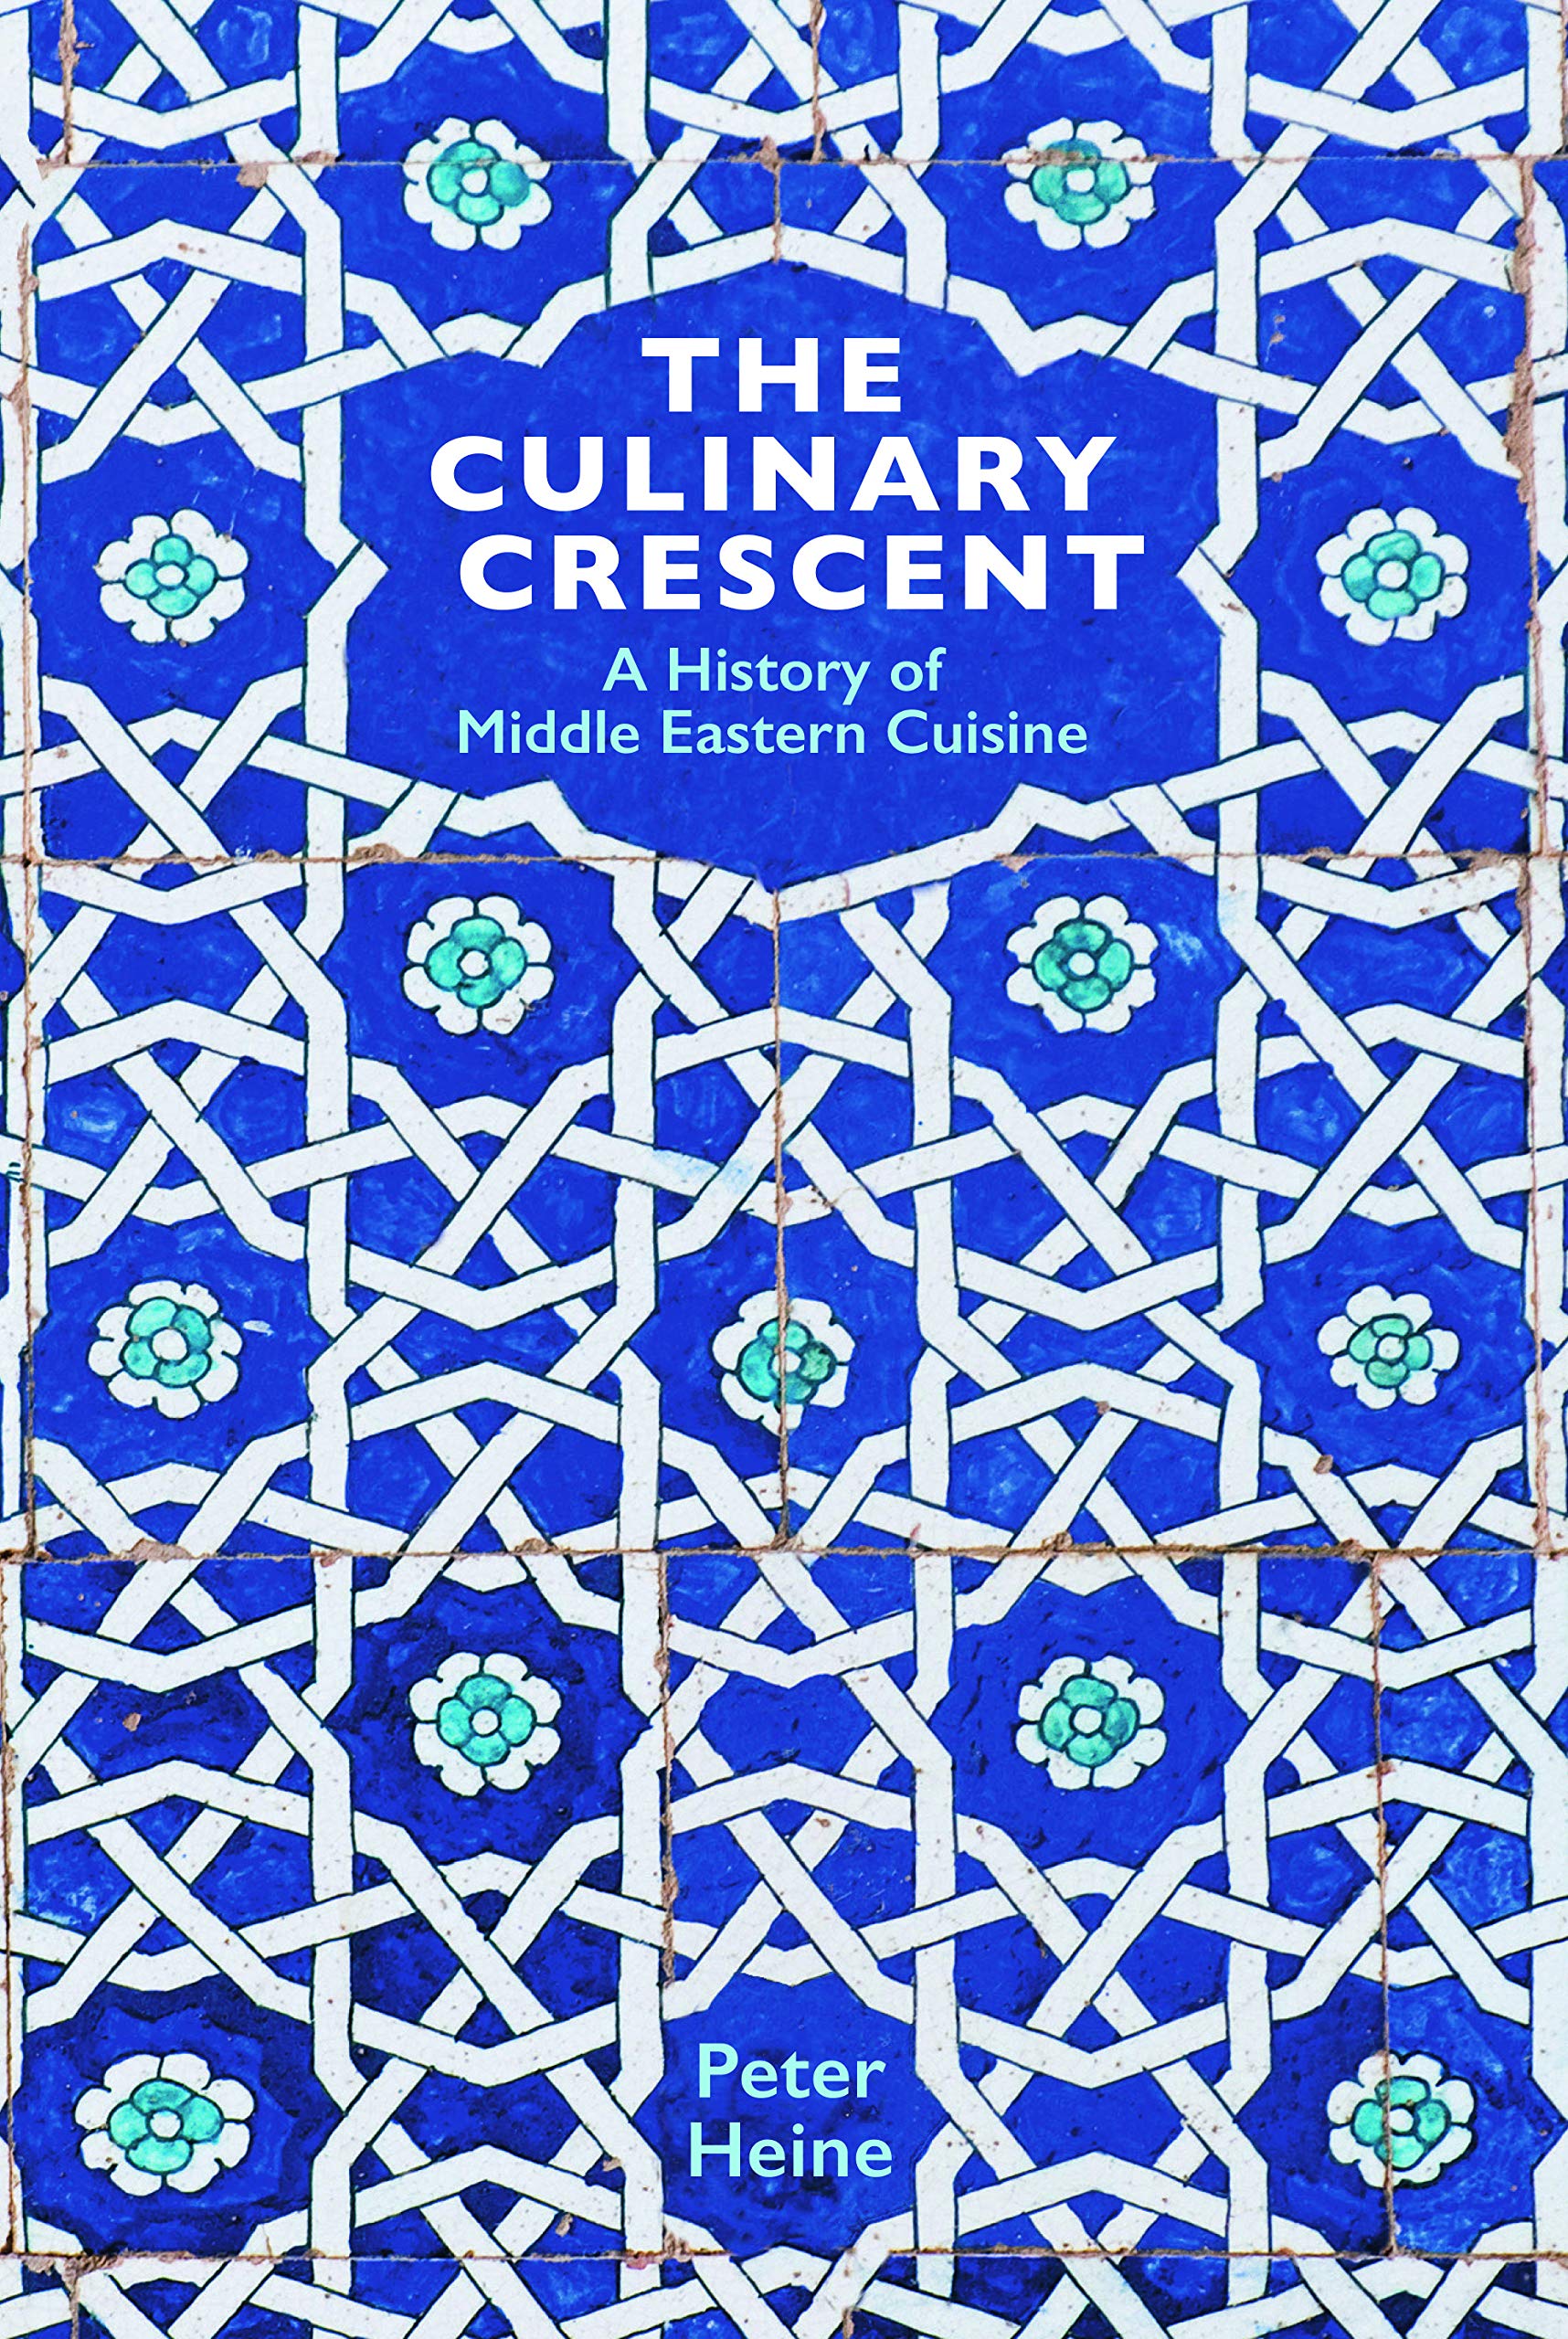 Cover of Peter Heine's "The Culinary Crescent: A History of Middle Eastern Cuisine" (published by Gingko Library; translation edition)